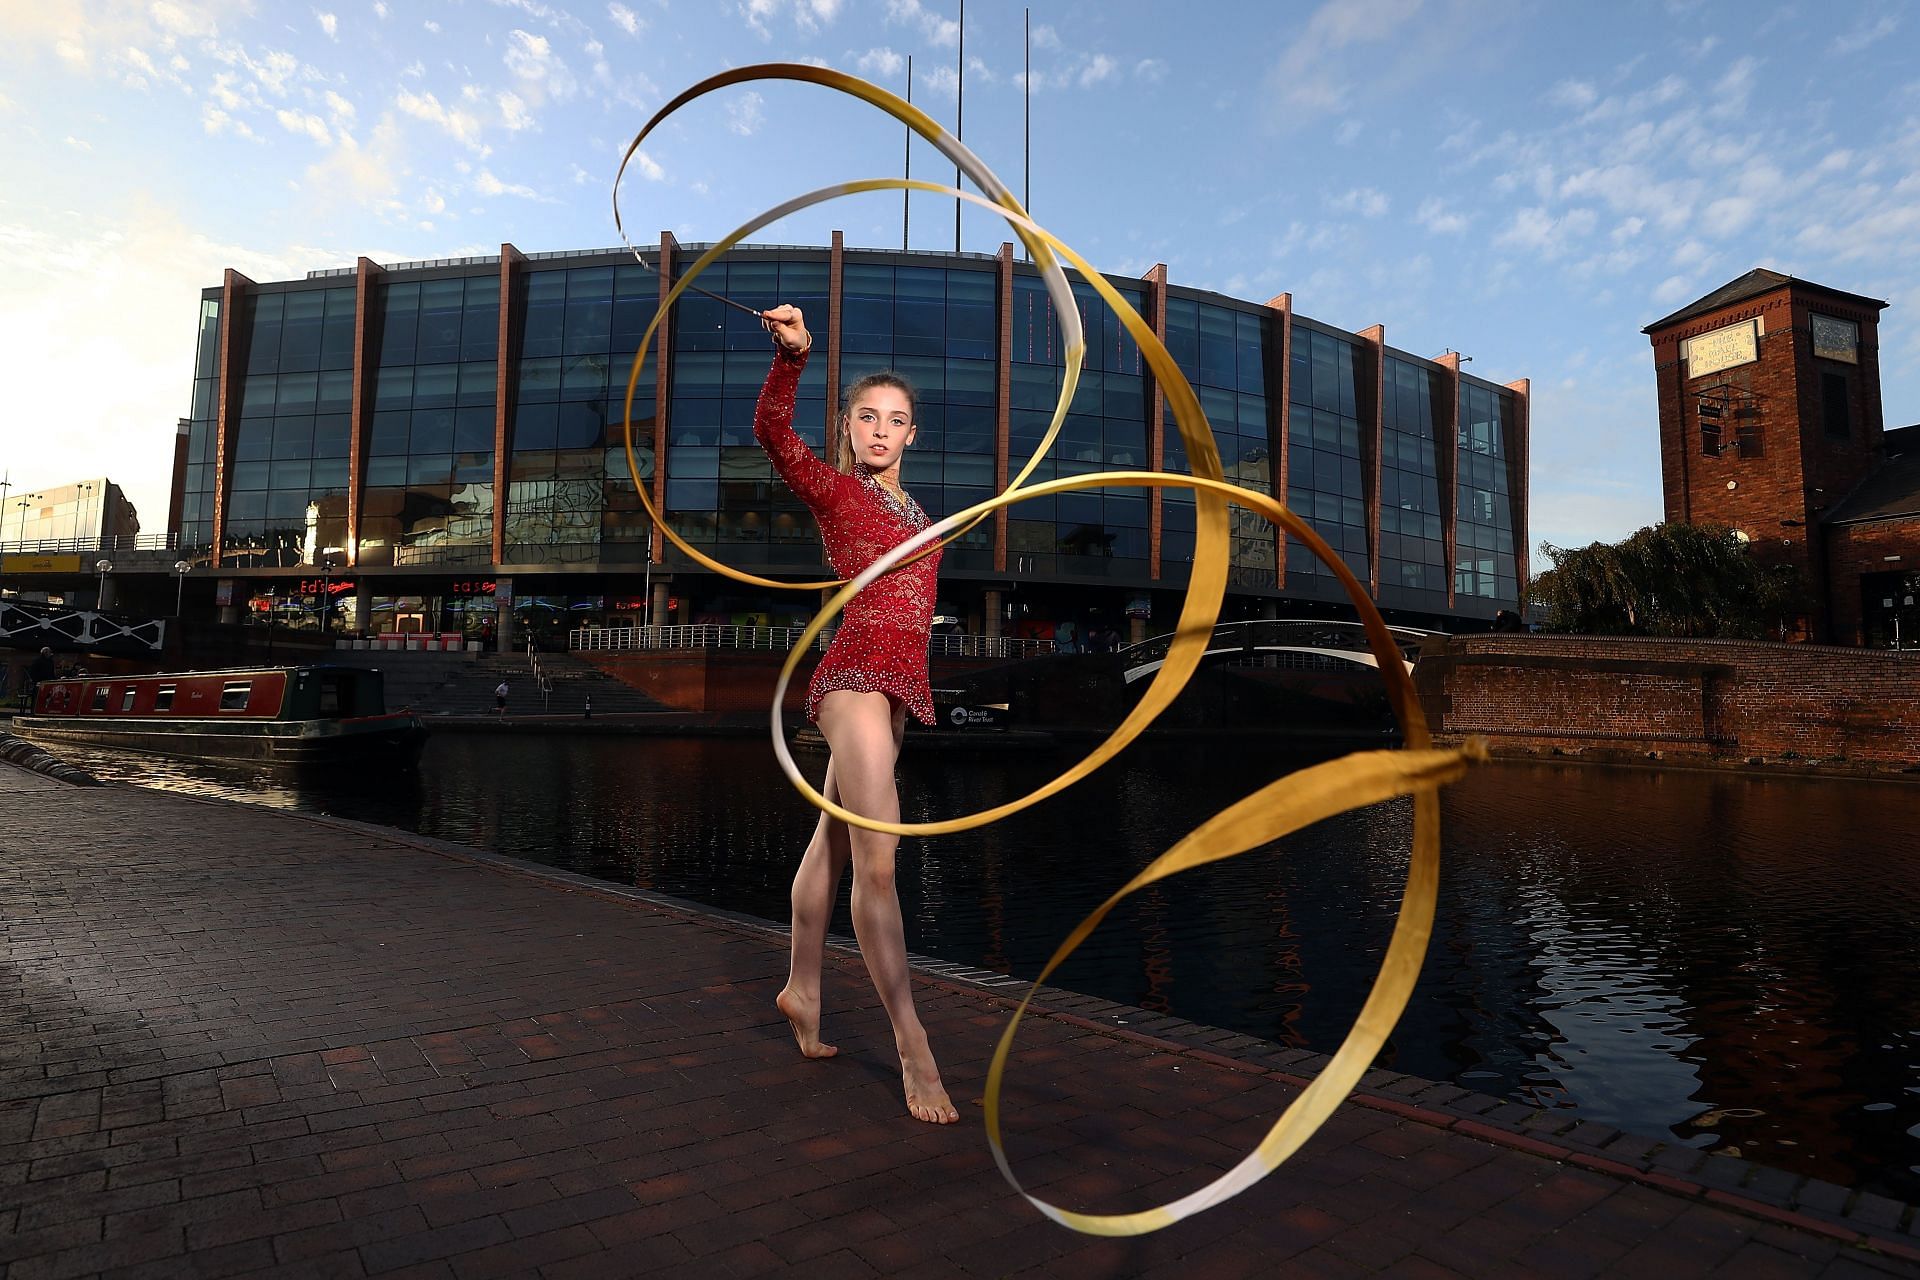 Venues and Sports Announcement for the Birmingham 2022 Commonwealth Games